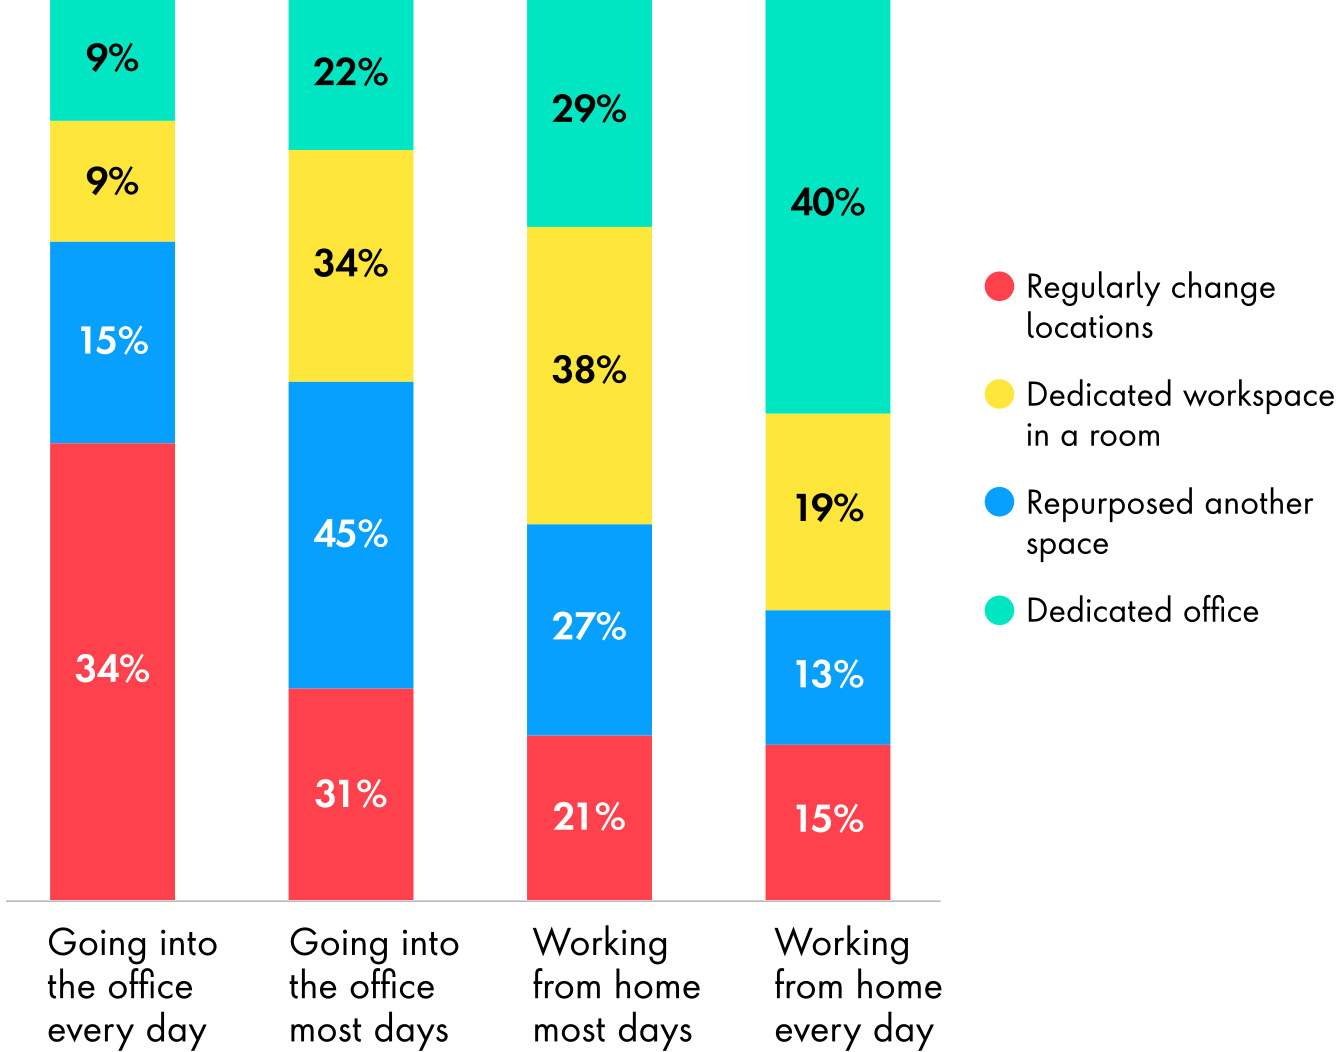 A bar chart showing preferences for how respondents want to work in the future. for those who are going into the office every day, 34% will regularly change locations, 15% will repurpose another space. For those working from home every day, only 15% prefer to regularly change locations and 40% prefer to have a dedicated office.